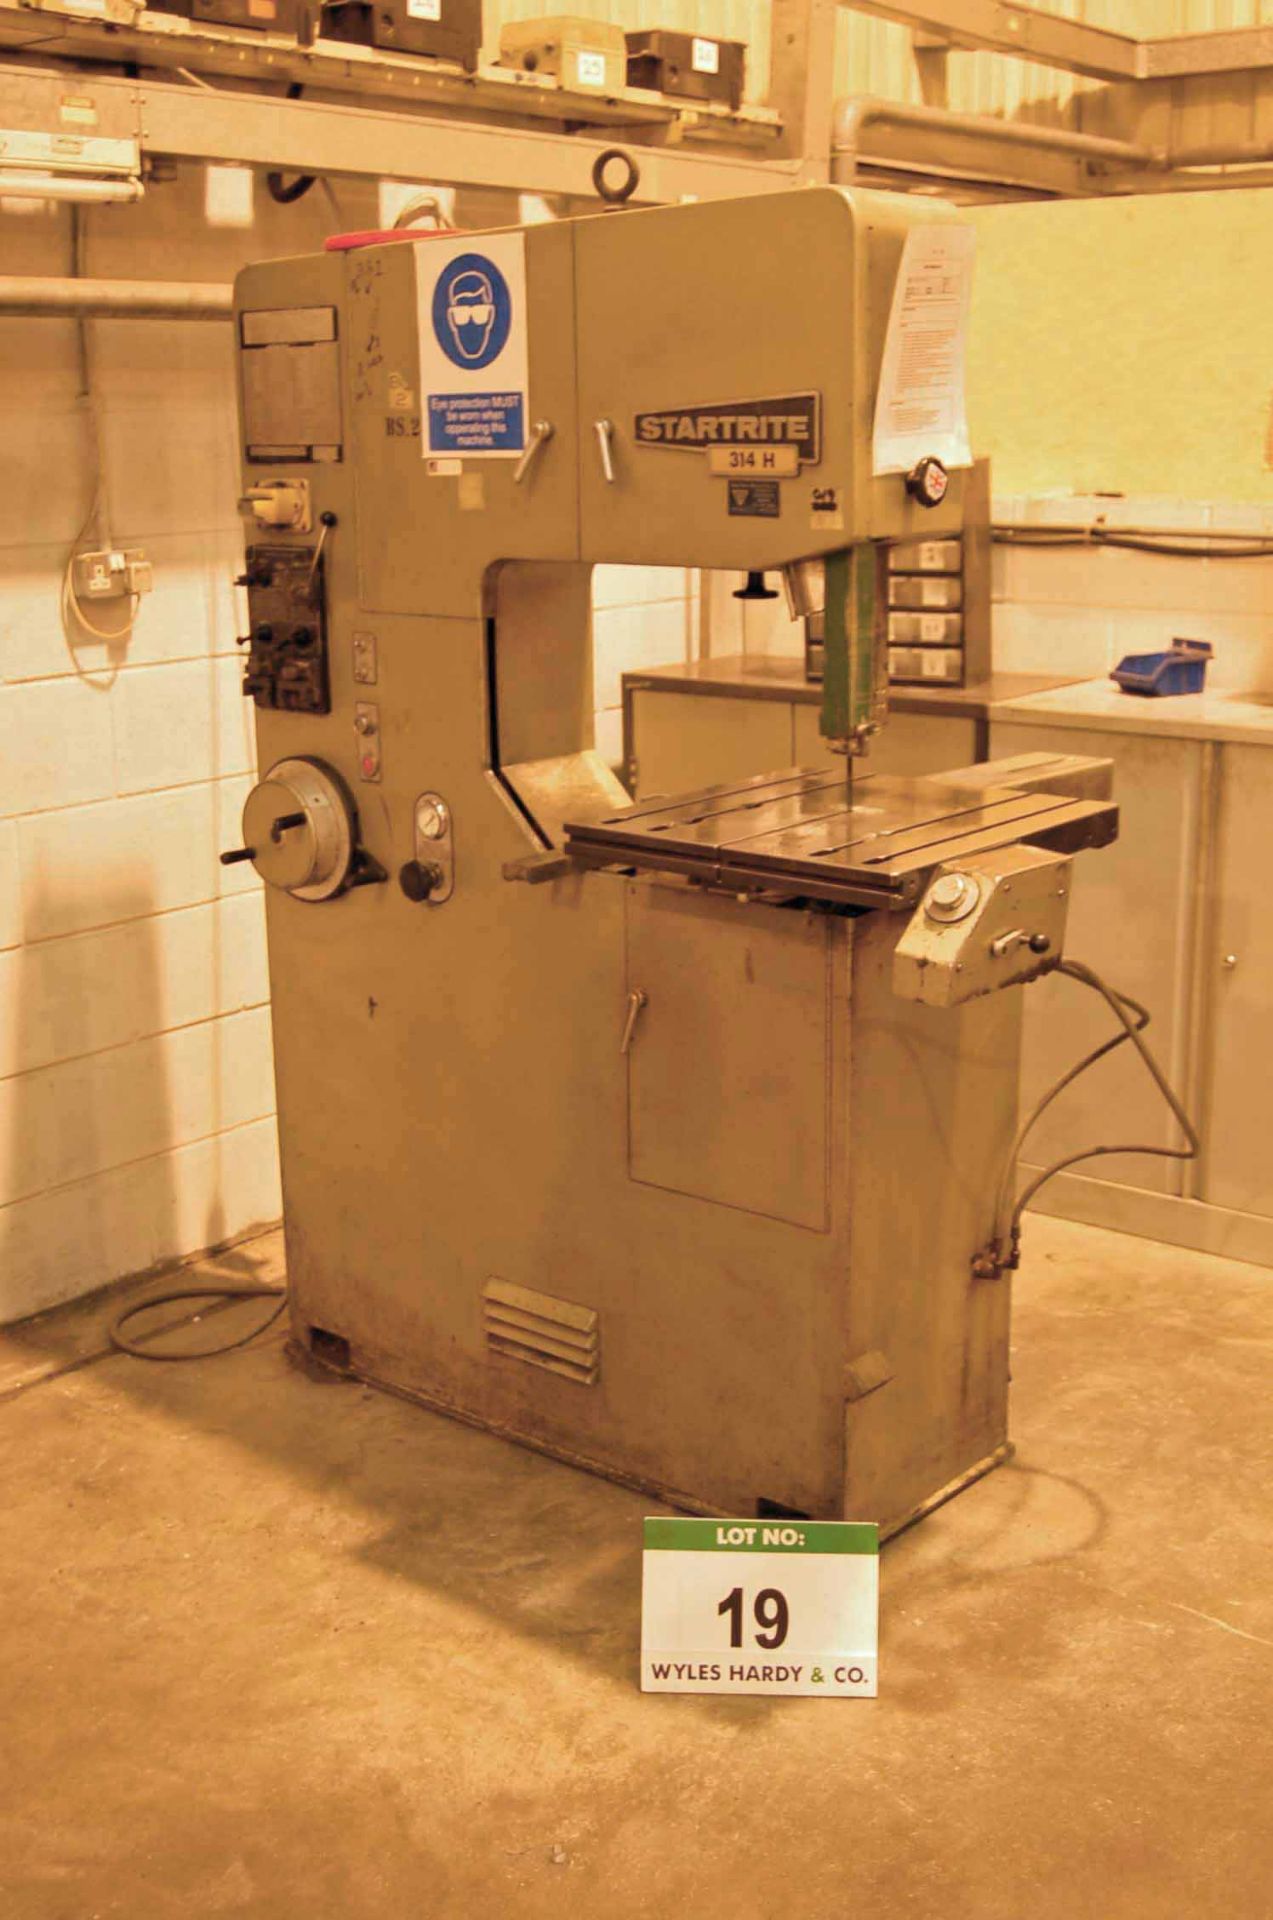 A STARTRITE 314 H Vertical Metal Cutting Band Sawing Machine, Serial No. 19197 with 2ft Throat,